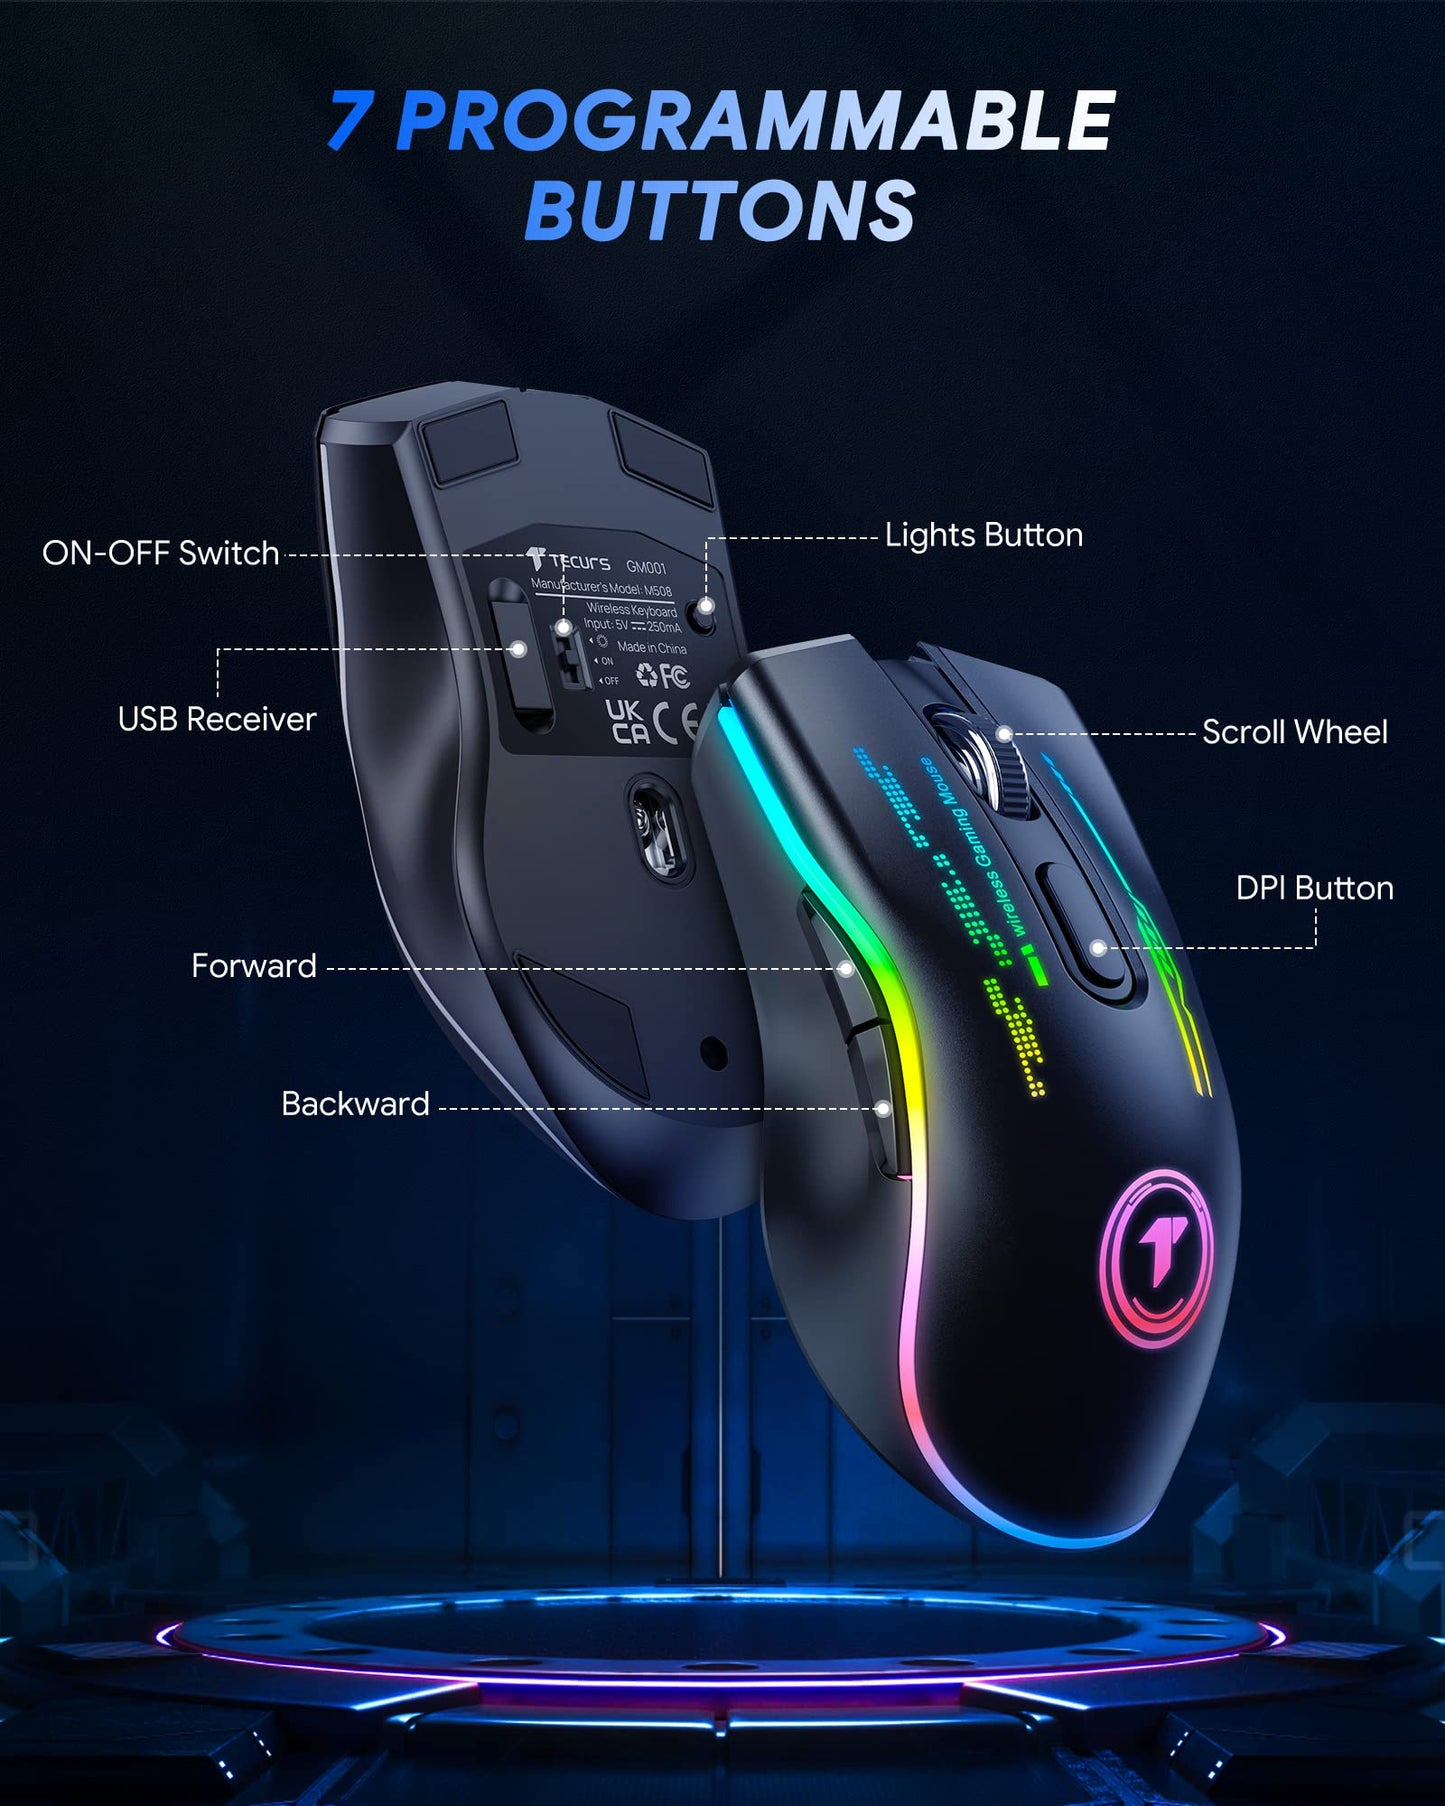 TECURS Gaming Mouse Wireless Gaming Mouse,USB Optical Computer Mouse Mice with 5 LED Lights,Rechargeable Gamer Mouse,4800 DPI for Laptop PC Gamer Desktop Chromebook Mac,Black - amzGamess